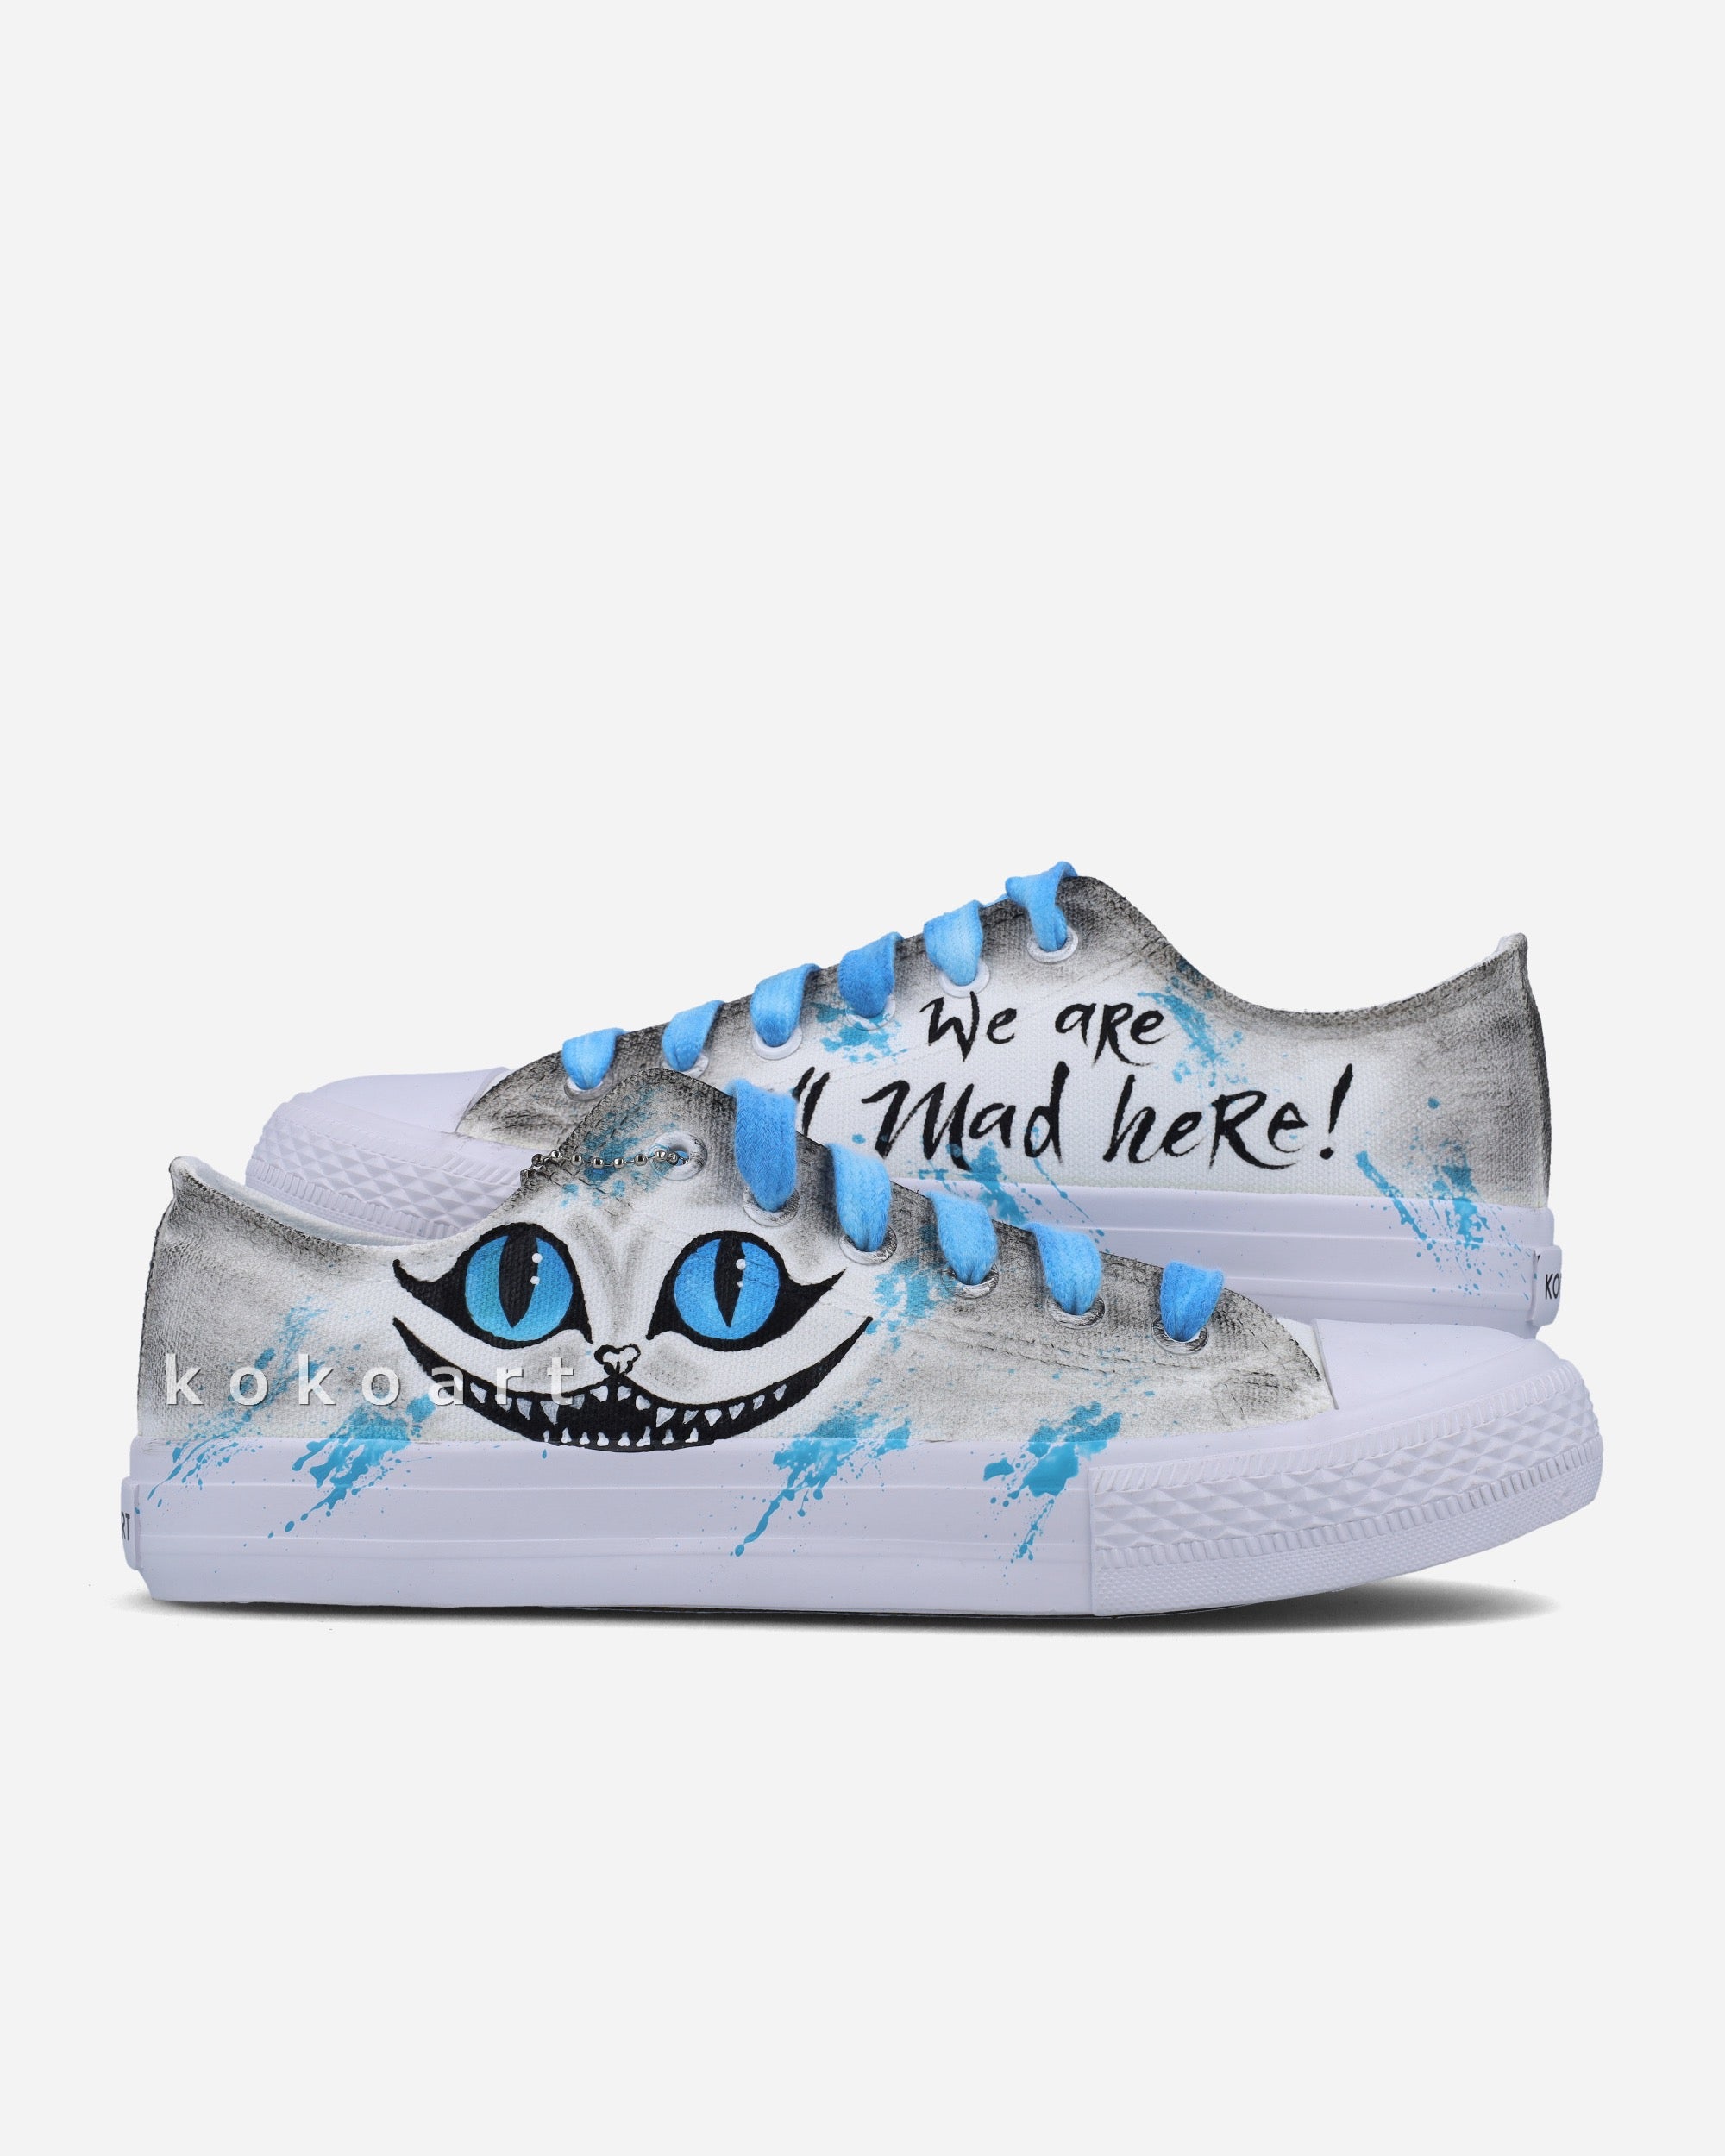 We're All Mad Here Hand Painted Shoes